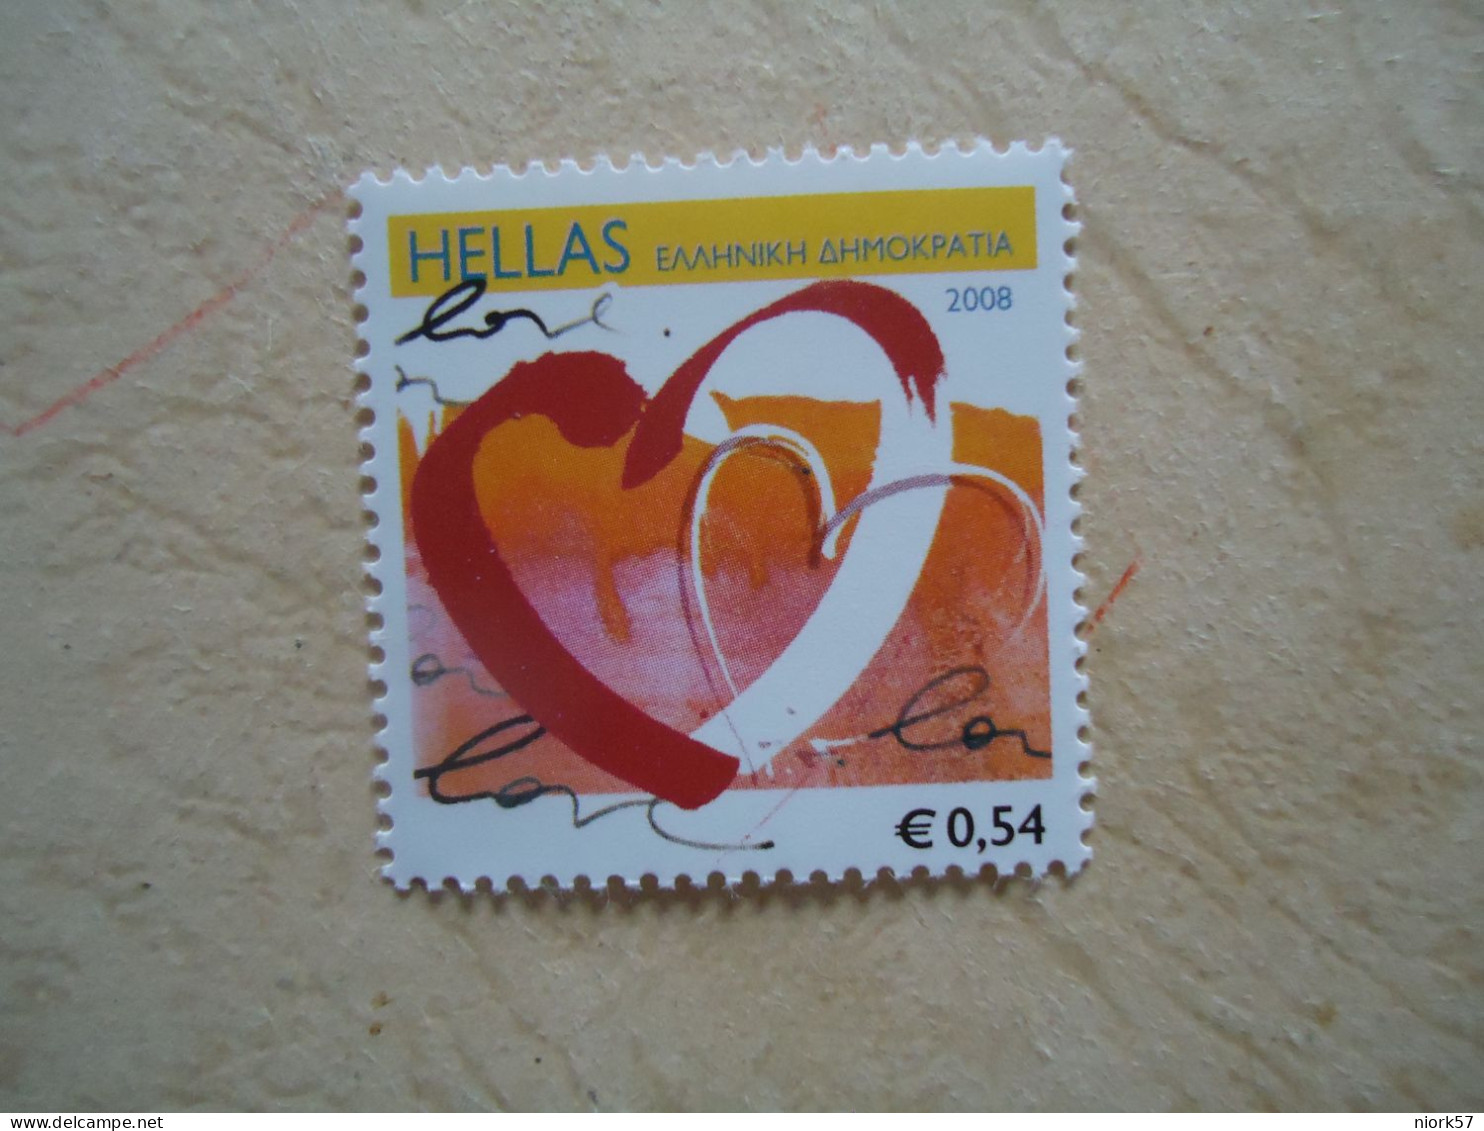 GREECE MNH STAMPS PERSSONAL  2008 - Poststempel - Freistempel